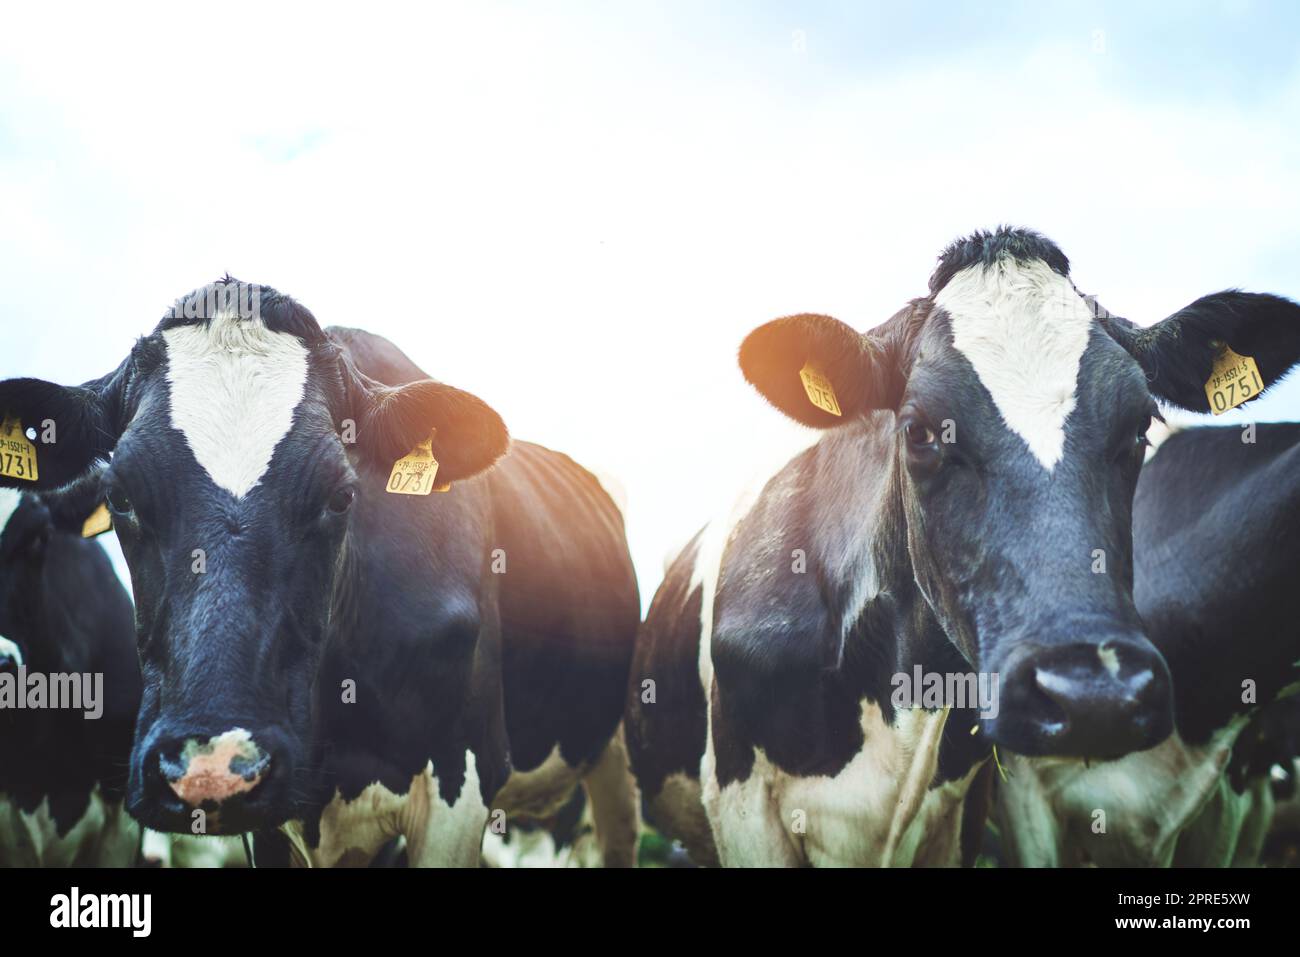 Were for team bovine. a herd of cattle on a dairy farm. Stock Photo